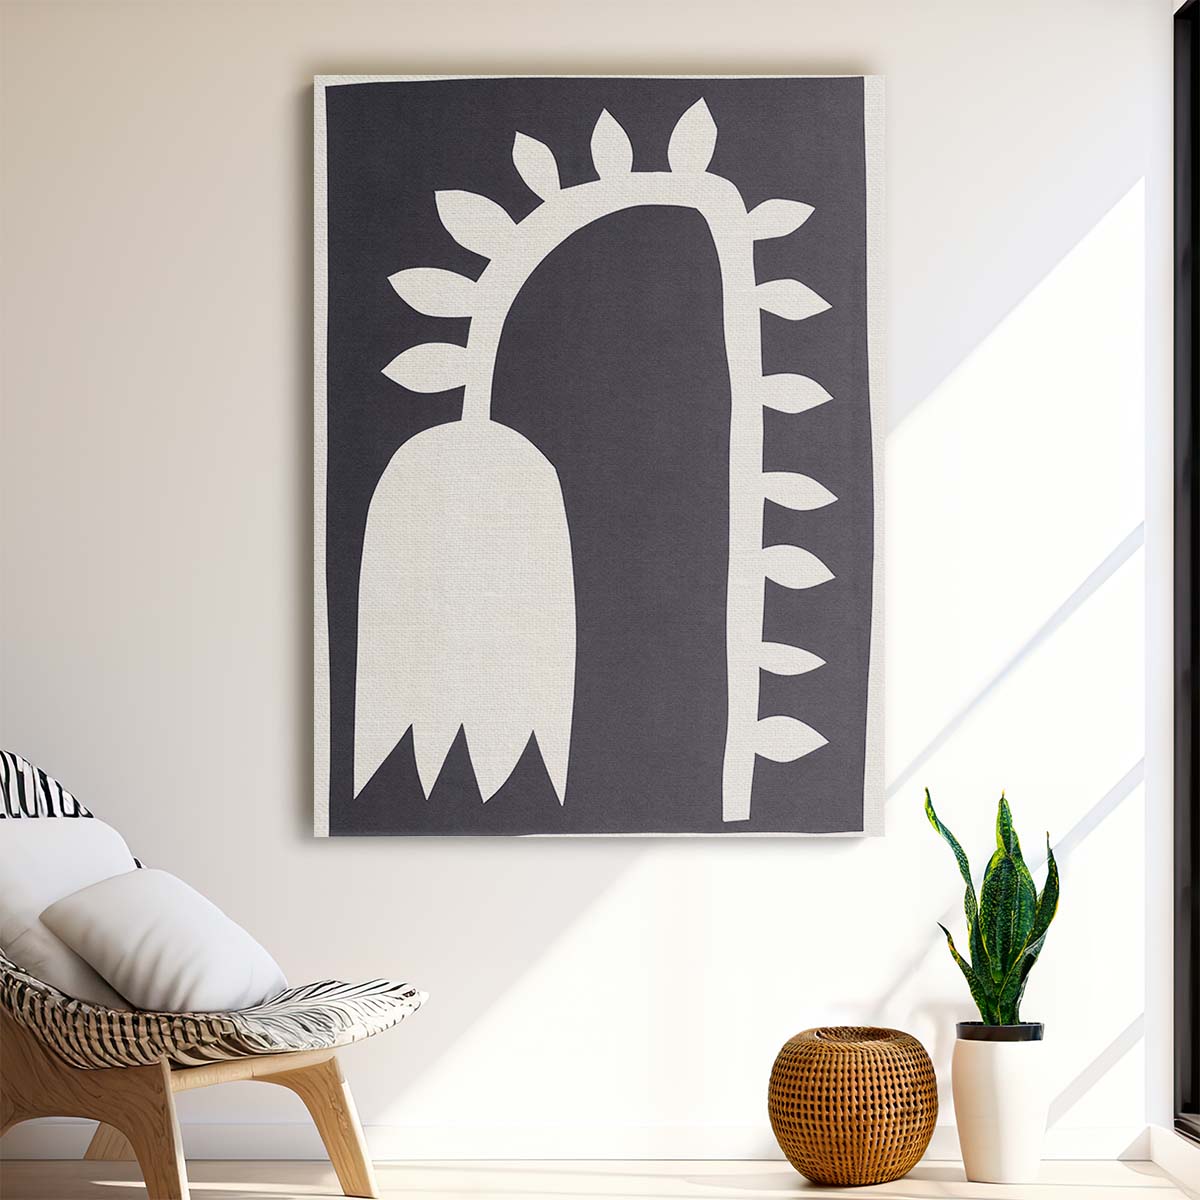 Minimalist Black Tulip Illustration, Monochrome Floral Wall Art by Luxuriance Designs, made in USA